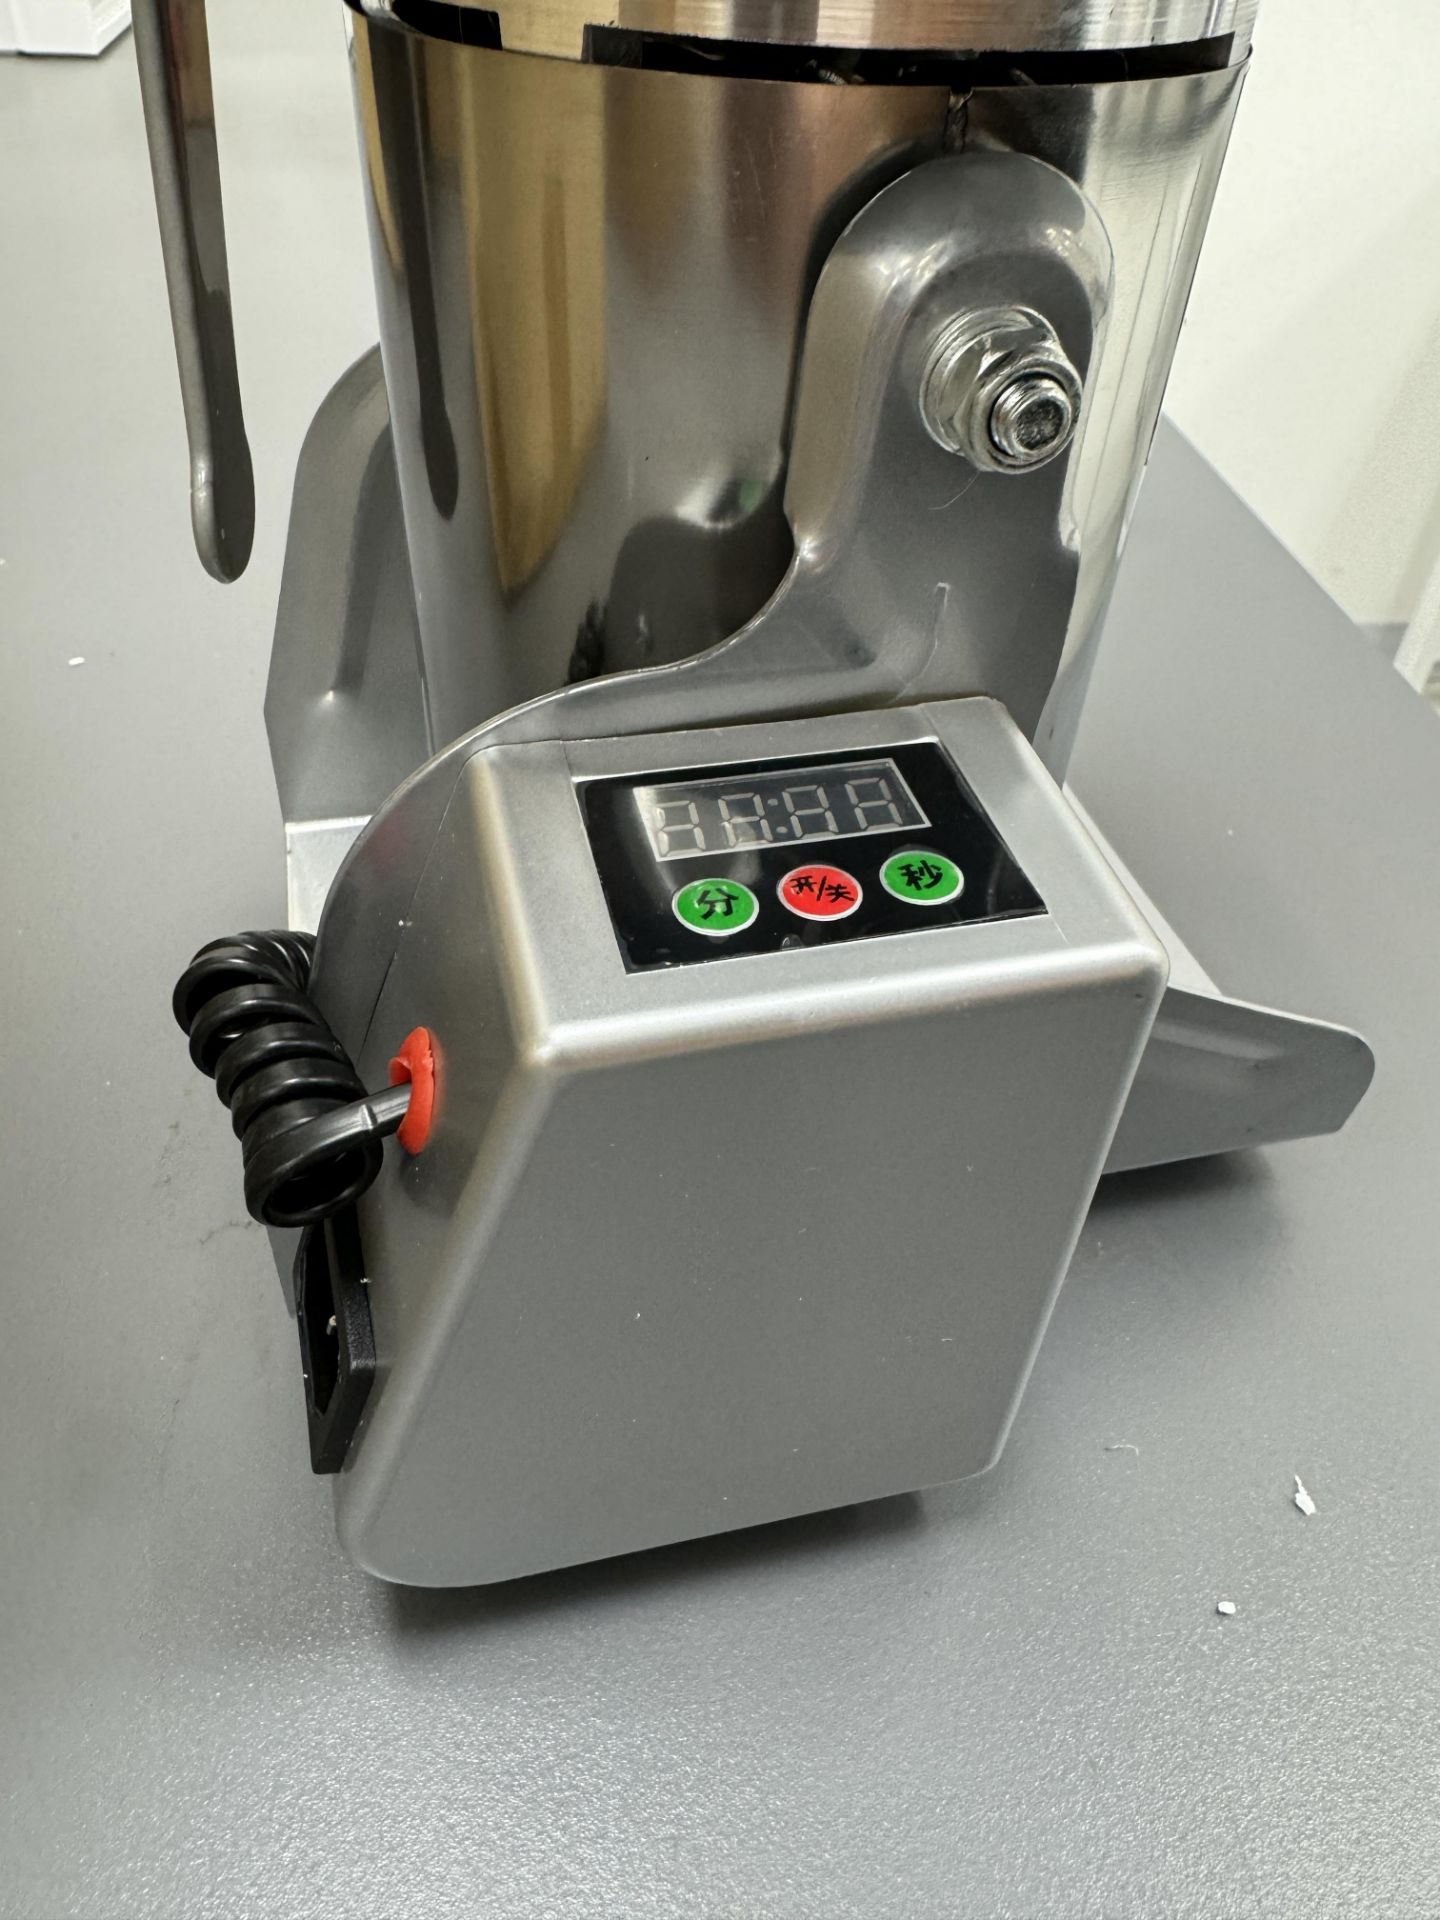 ALD Kitchen Model 2000A, Stainless Steel High Speed Multi Function Electric Grain Grinder/Comminutor - Image 4 of 6